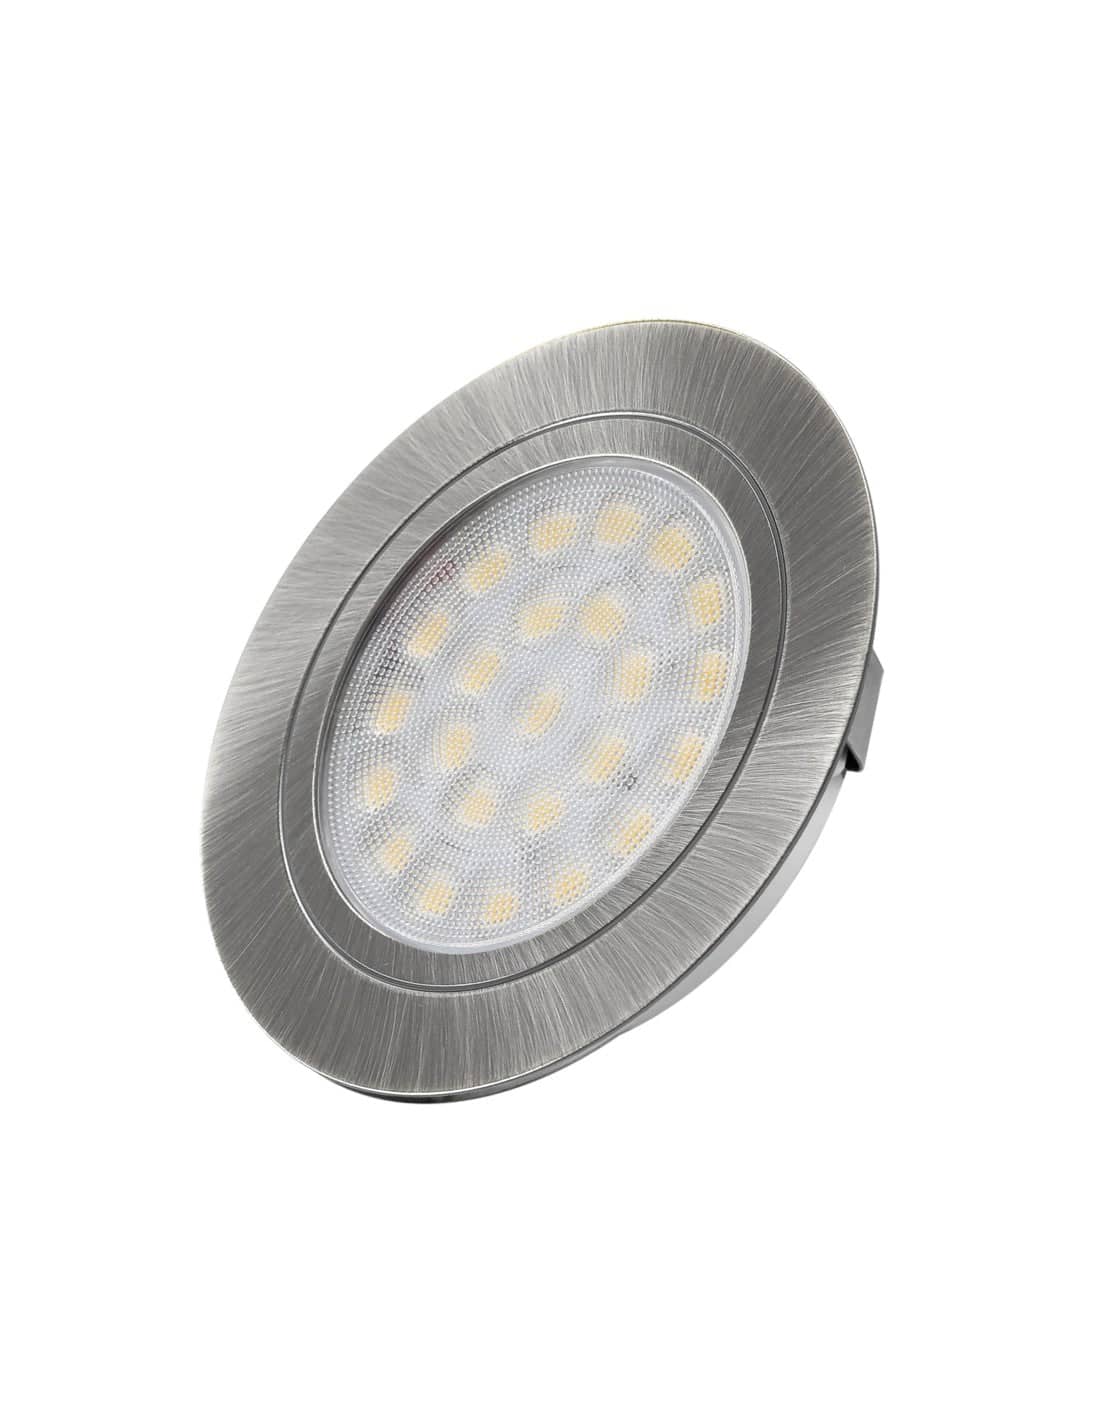 Oval Recessed Mount - Brushed Steel Cool White 60K   OVAL-2W-SD-60K-01